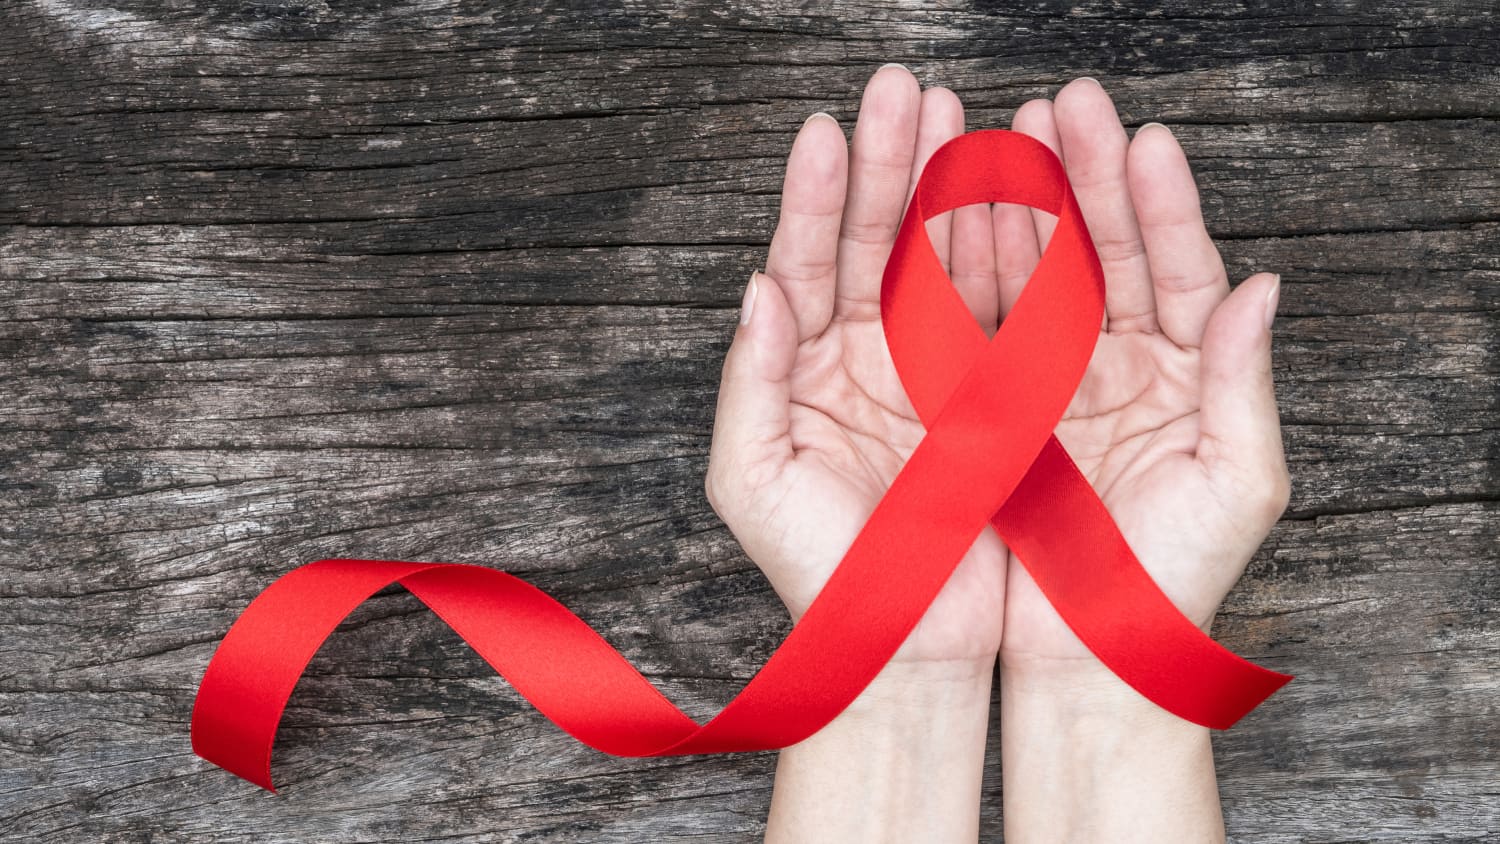 Science Quiz! You're Genius-Level Intelligent If You Find This Easy HIV AIDS ribbon